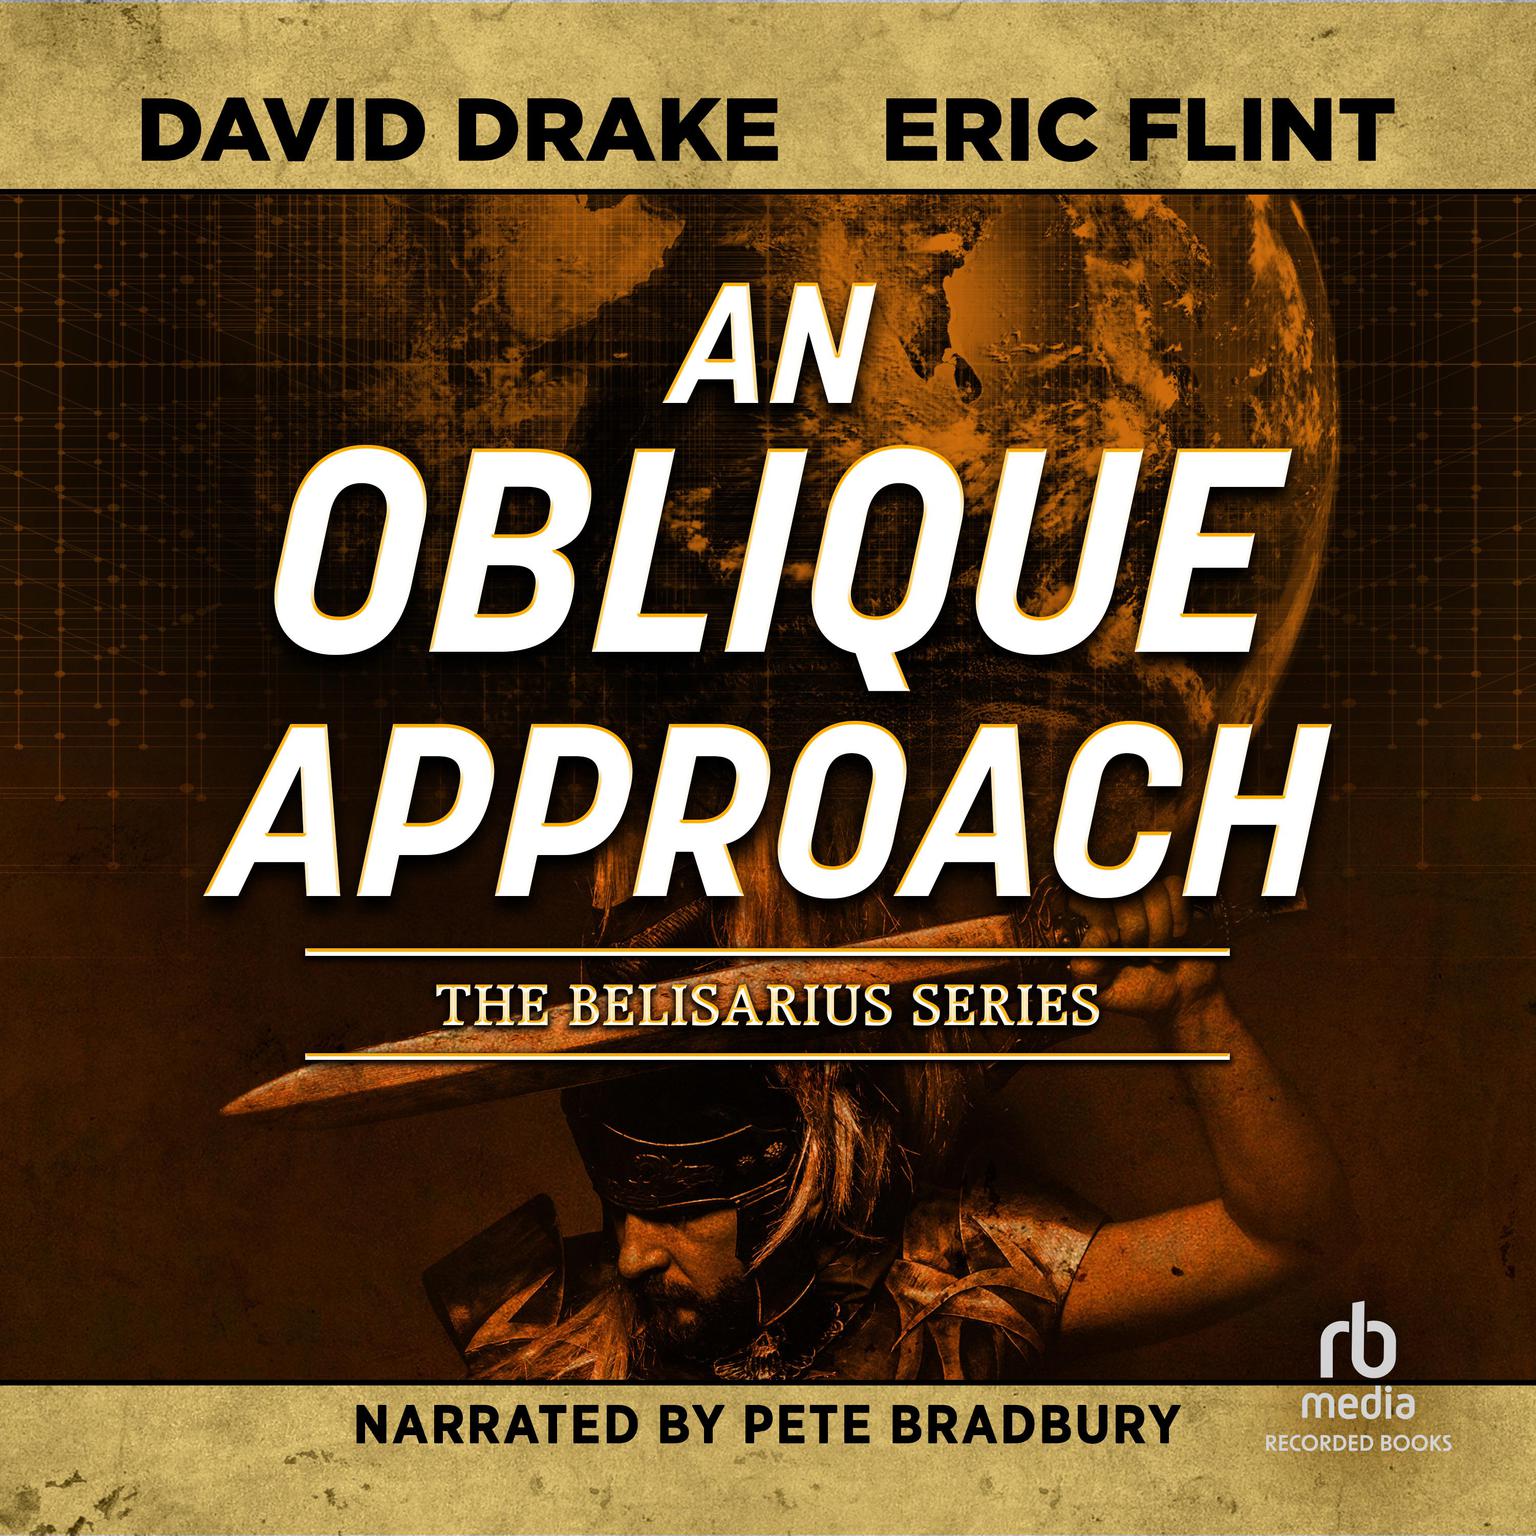 An Oblique Approach Audiobook, by David Drake